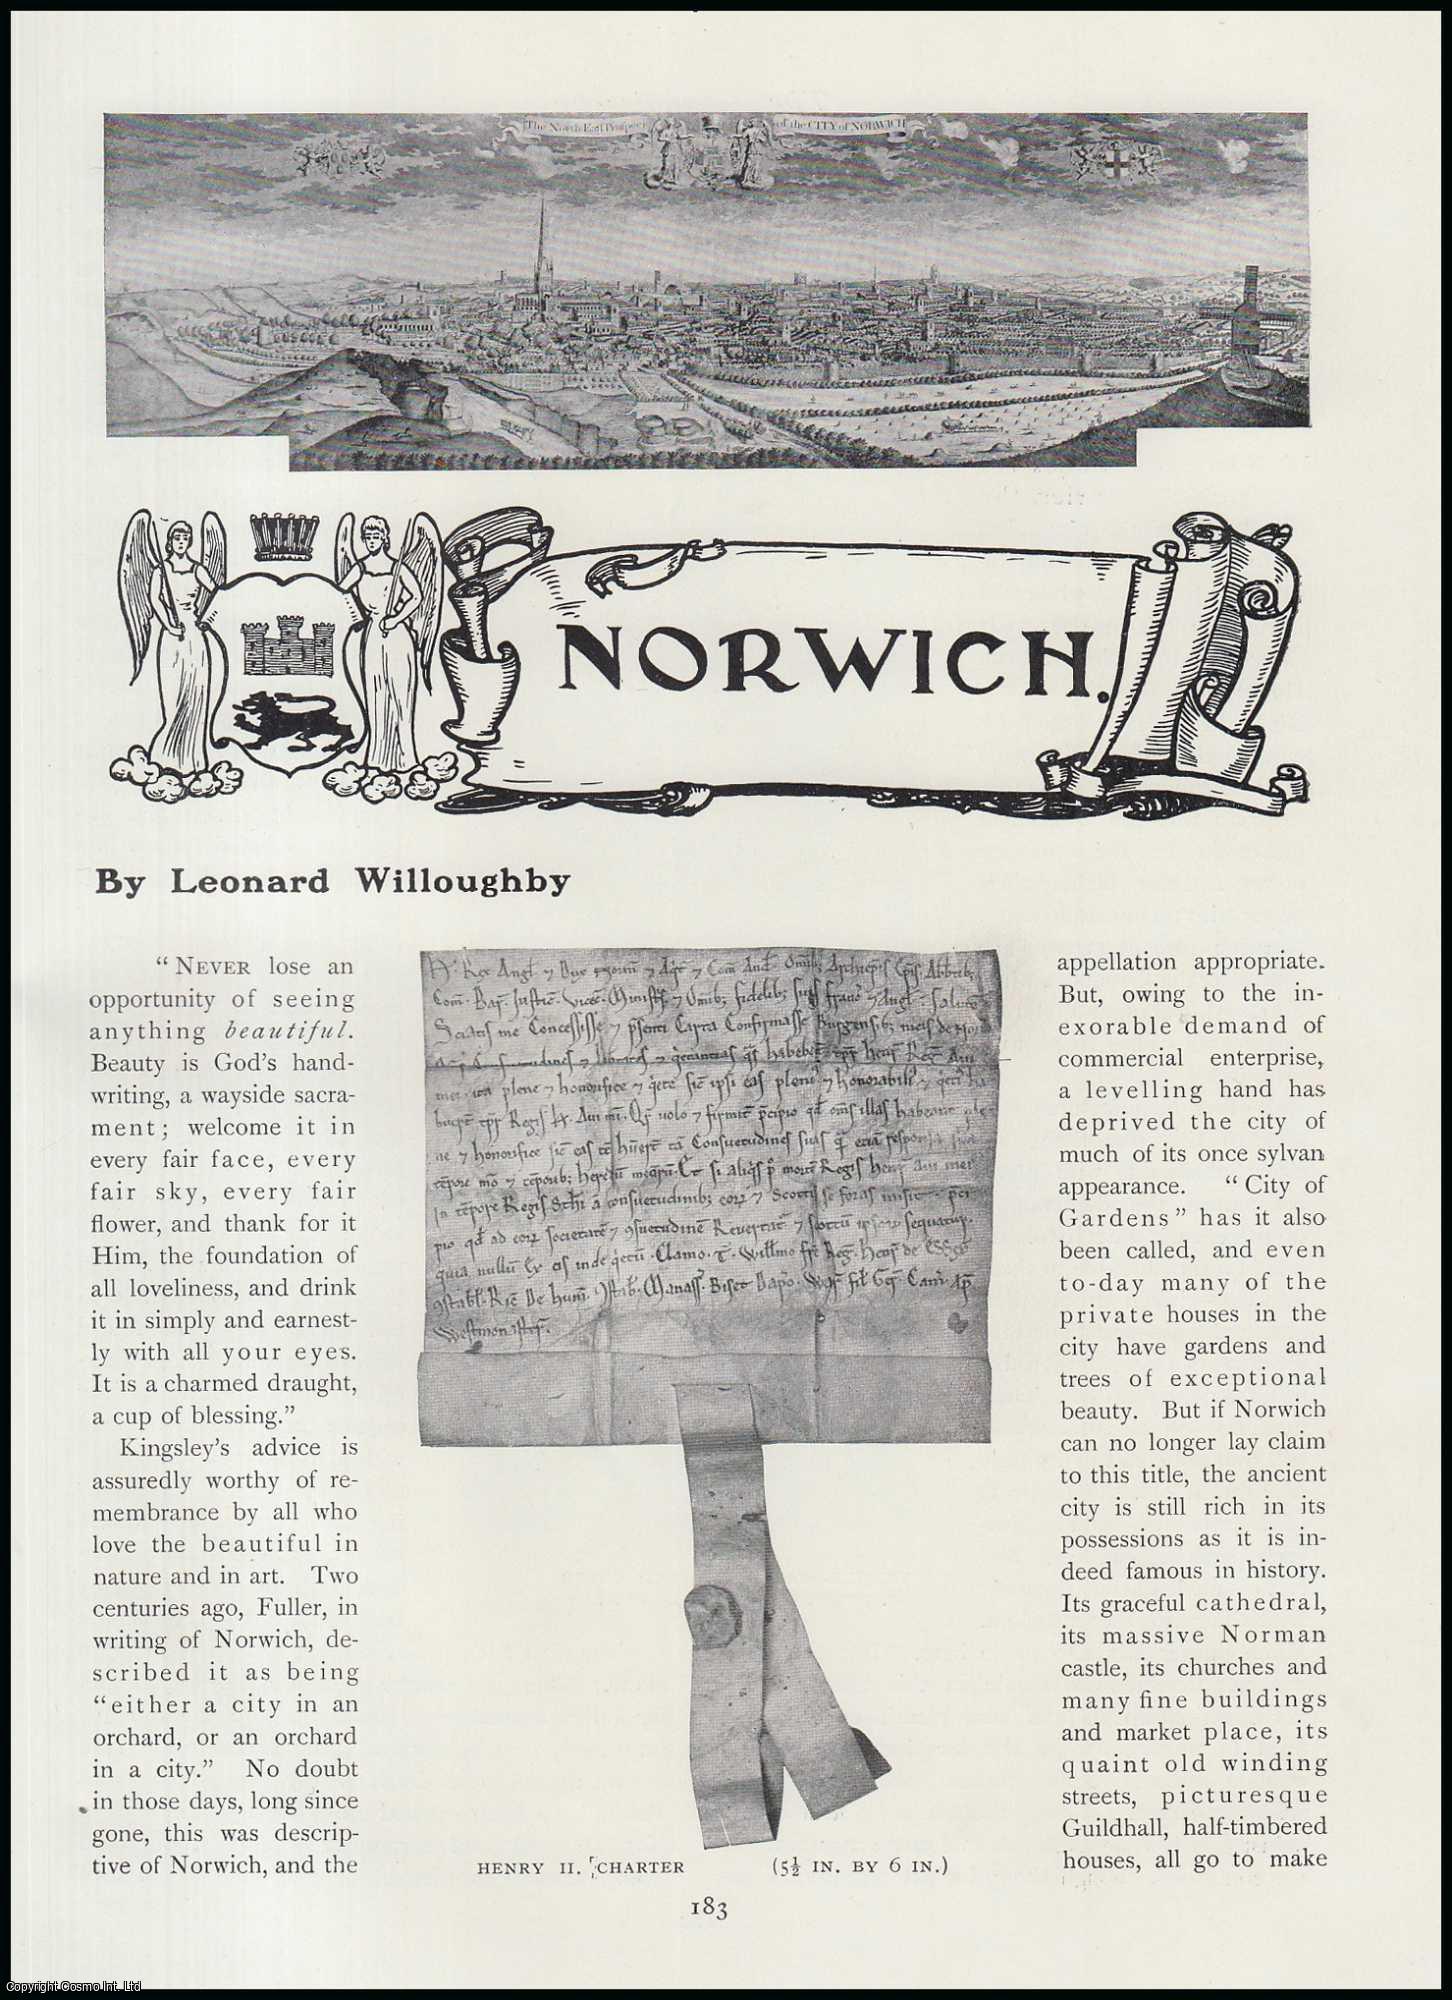 Leonard Willoughby - Norwich, The City in England's Norfolk County TOGETHER WITH The Norwich Corporation Plate. An original article from The Connoisseur, 1907.